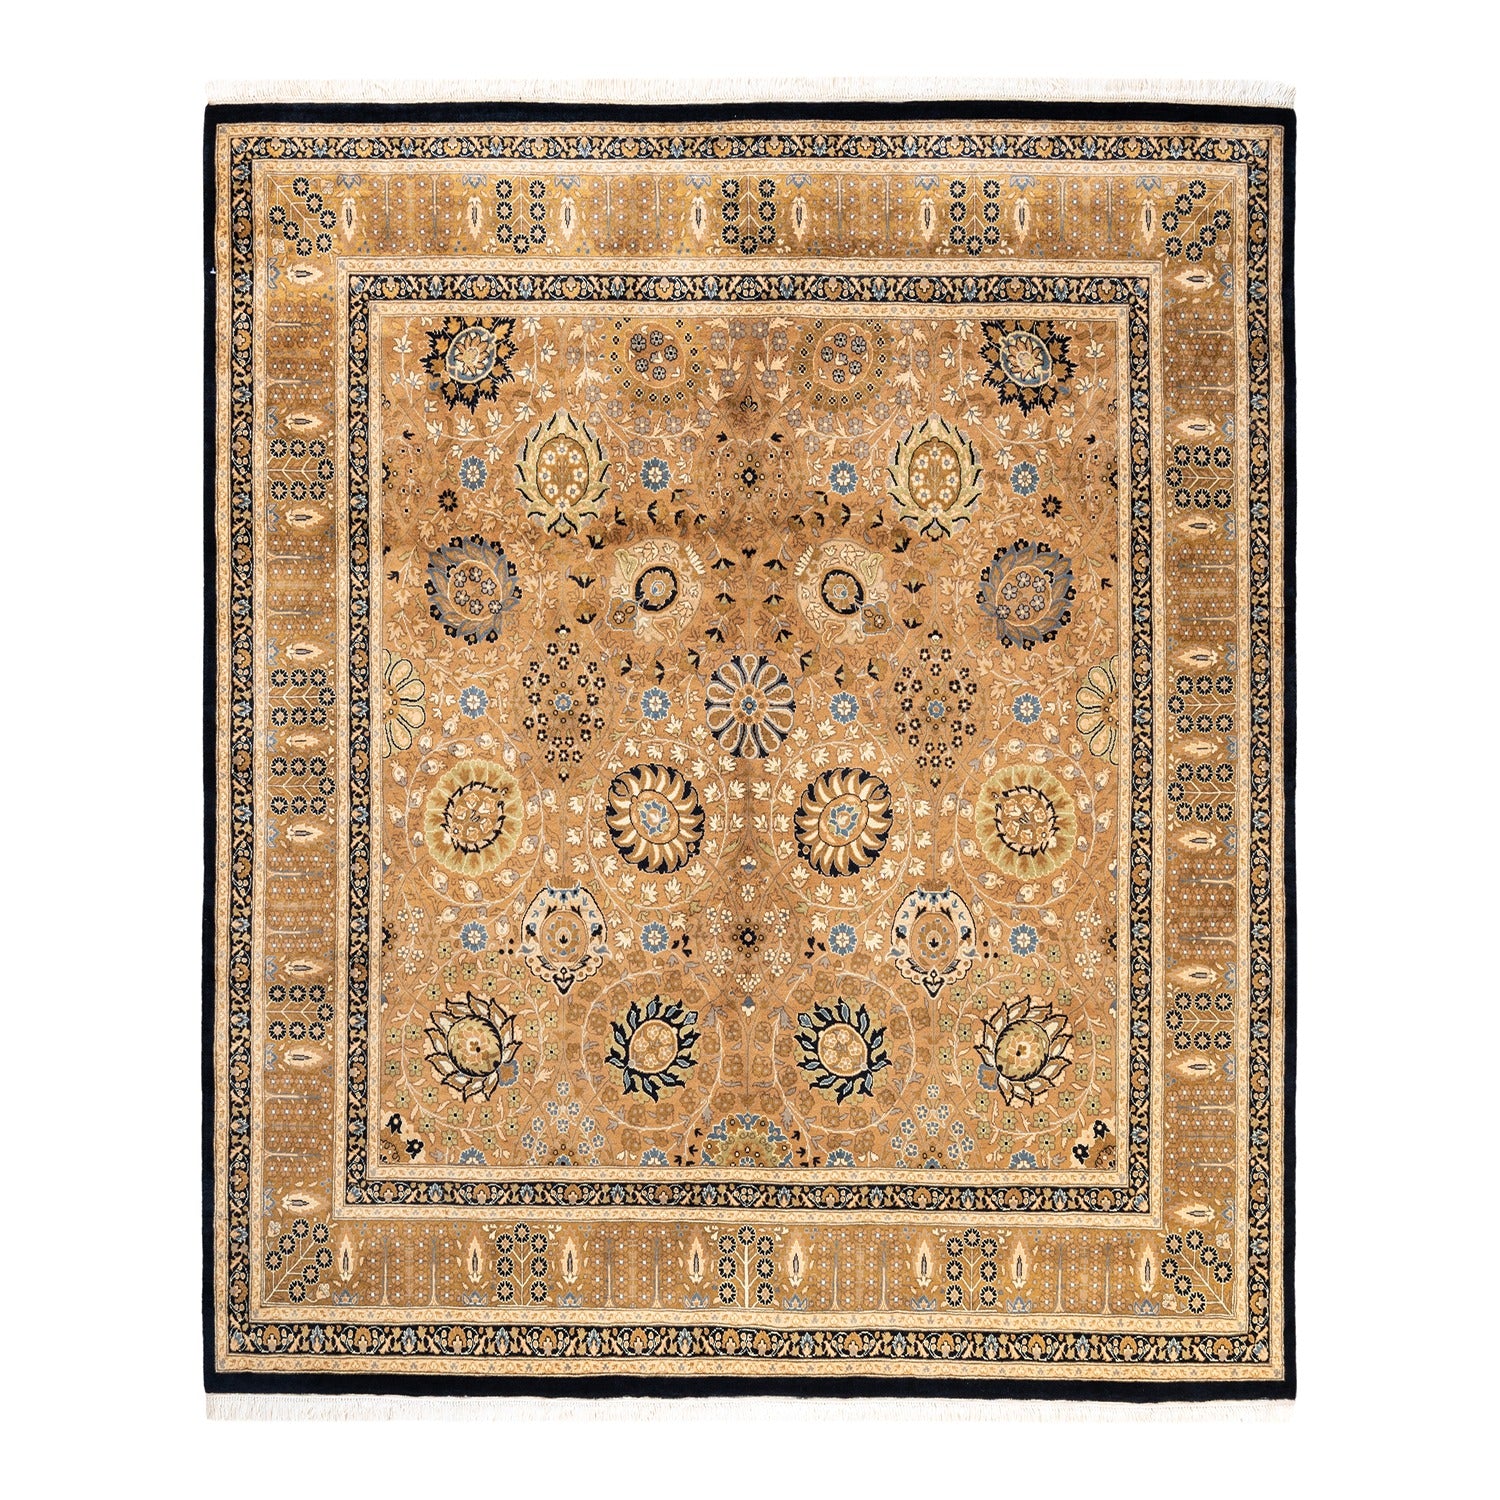 Exquisite hand-knotted rug with intricate design in beige and blue.